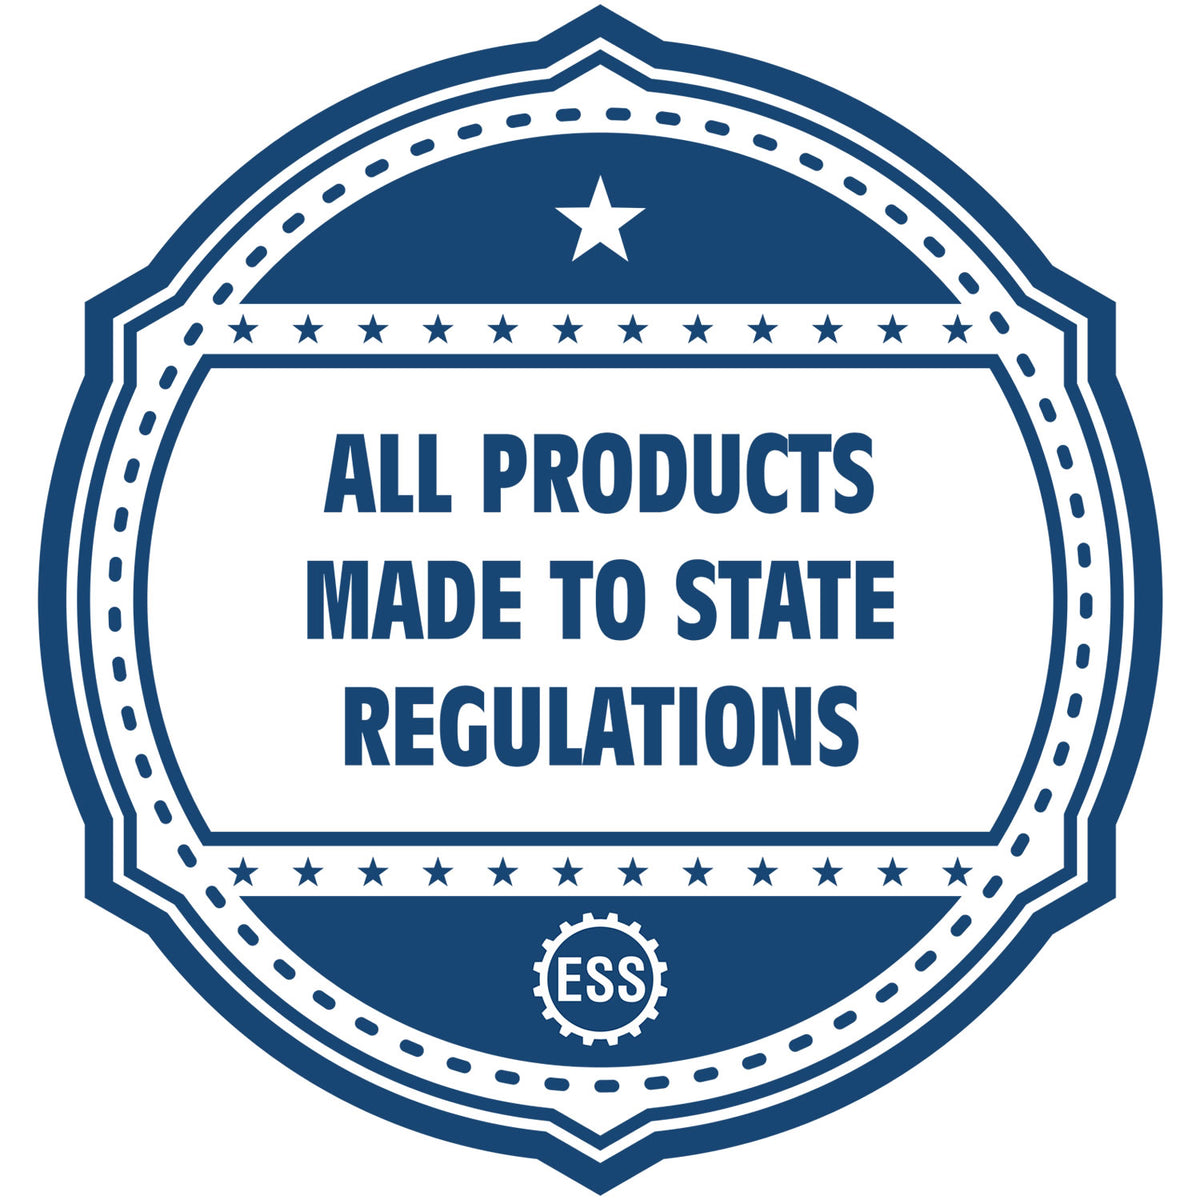 An icon or badge element for the Heavy Duty Cast Iron Connecticut Engineer Seal Embosser showing that this product is made in compliance with state regulations.